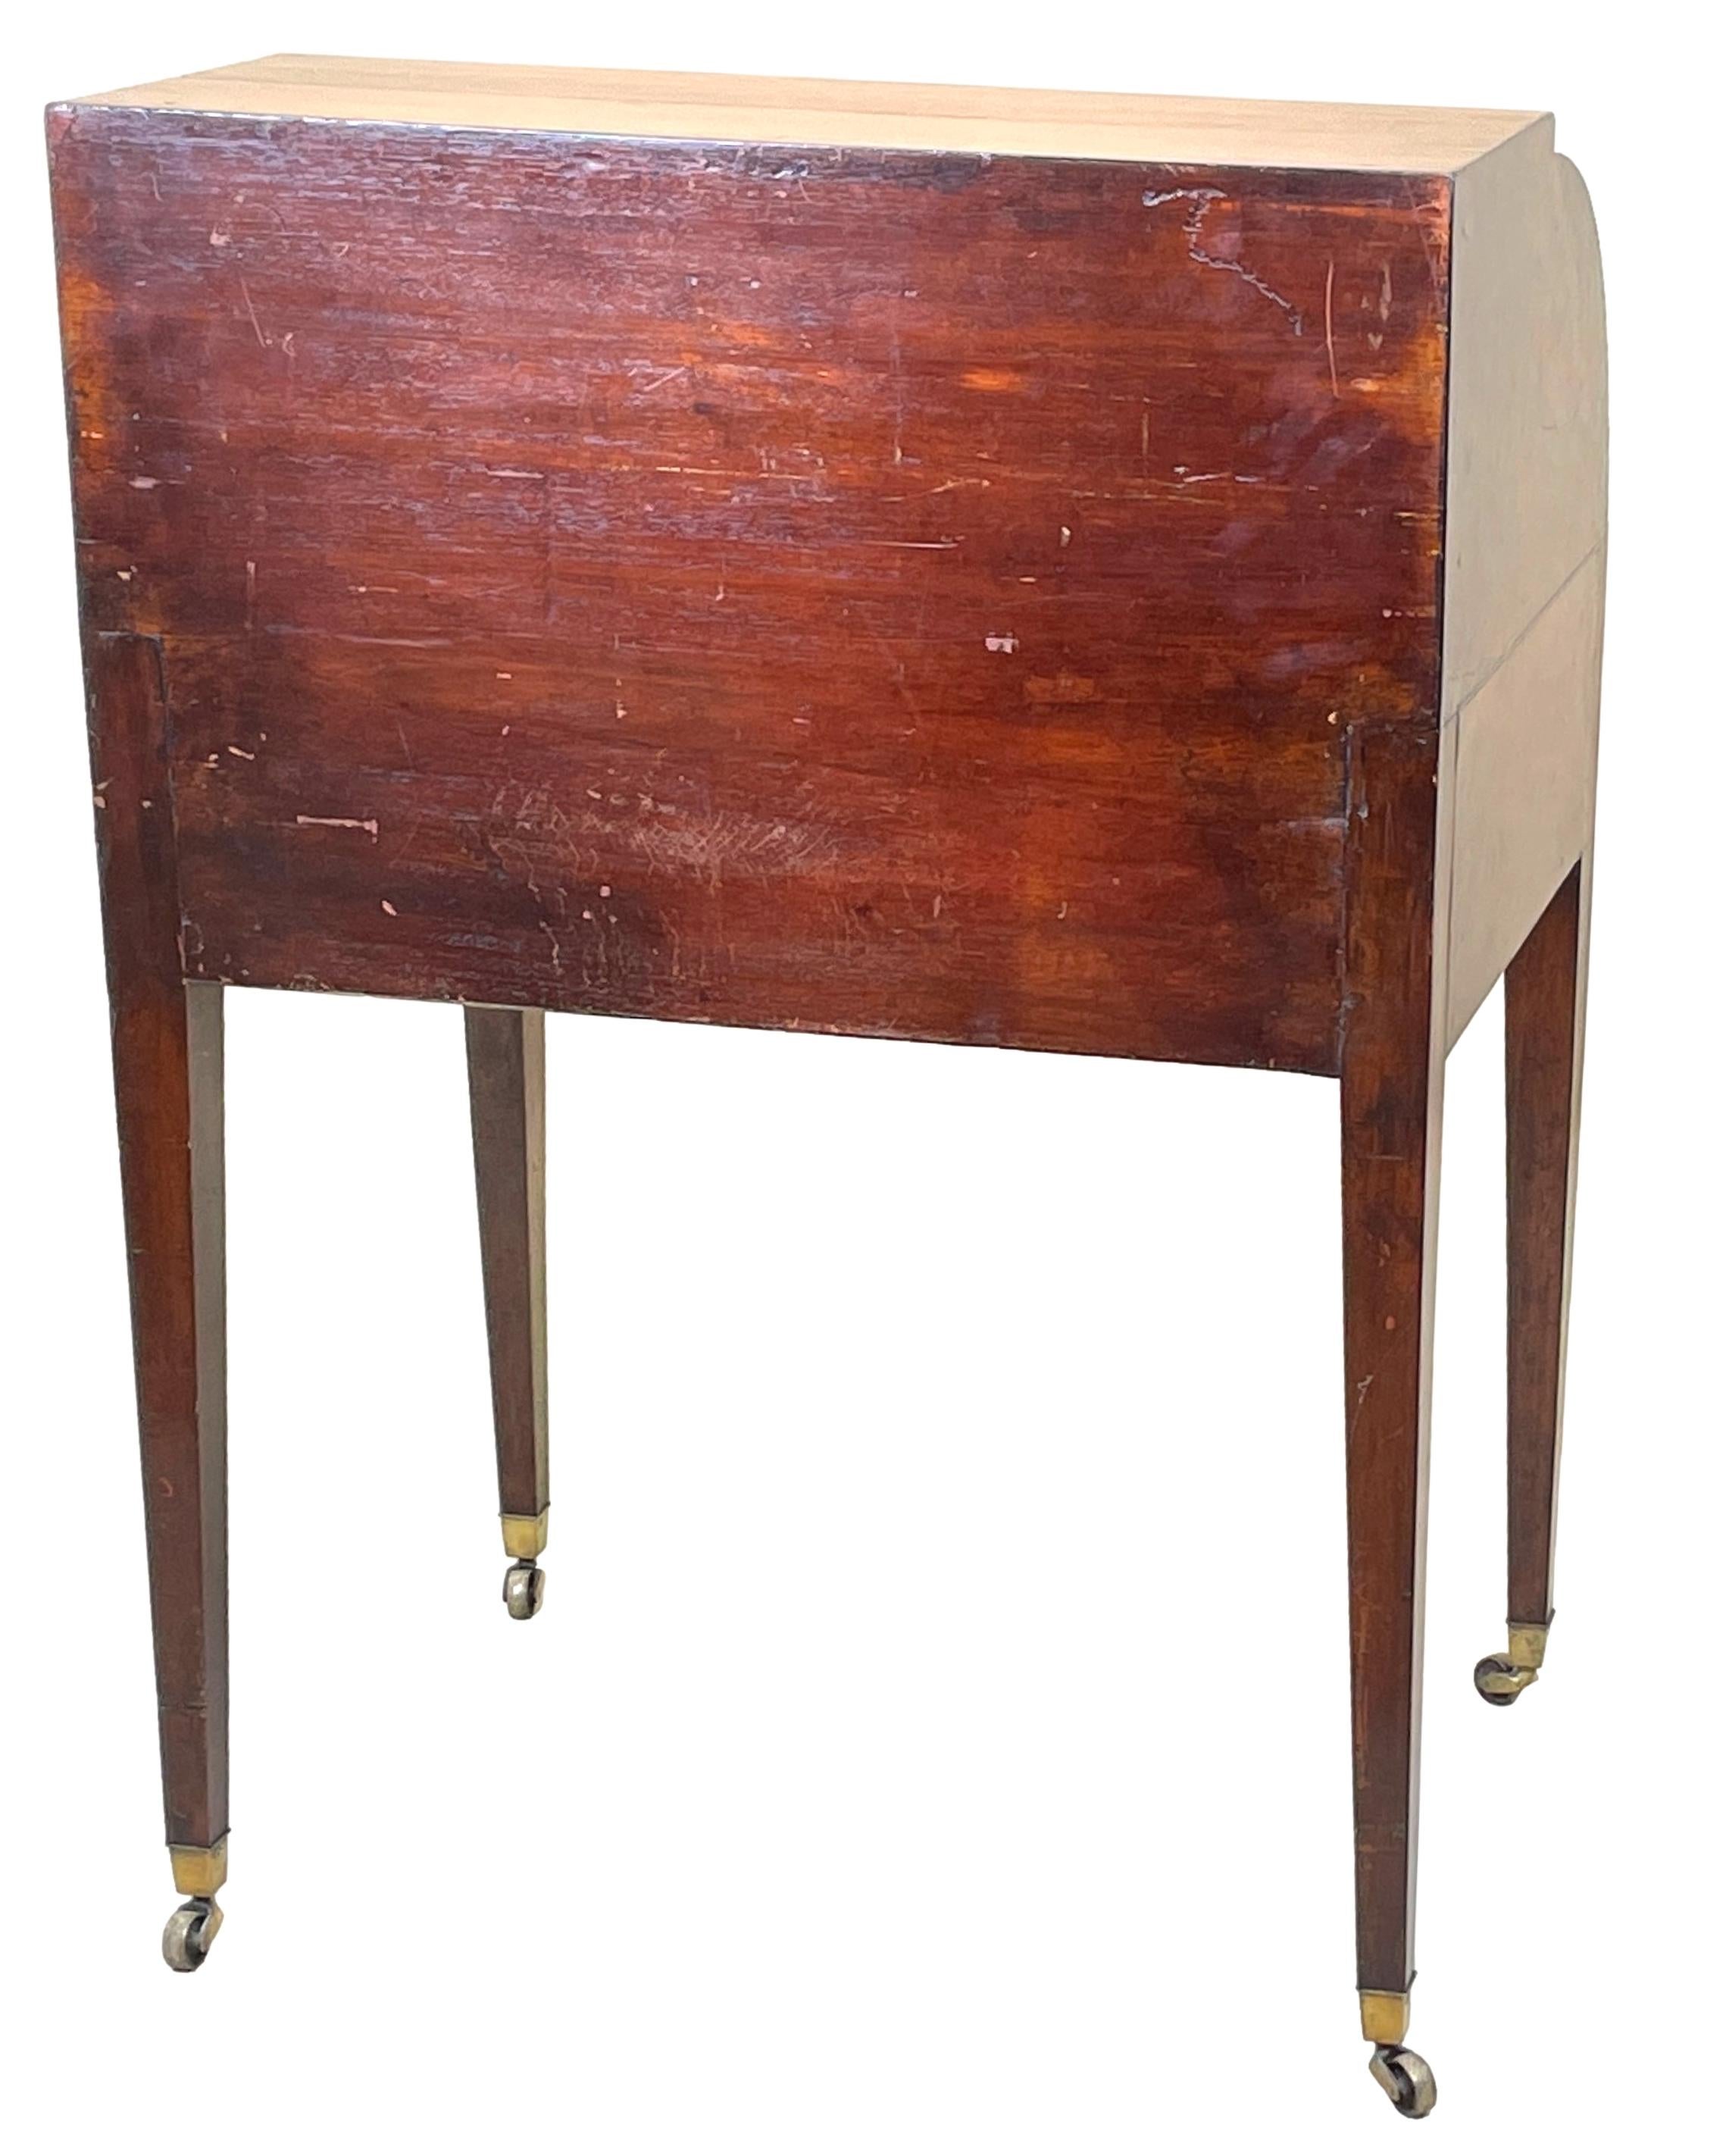 18th Century Mahogany Cylinder Desk In Good Condition For Sale In Bedfordshire, GB